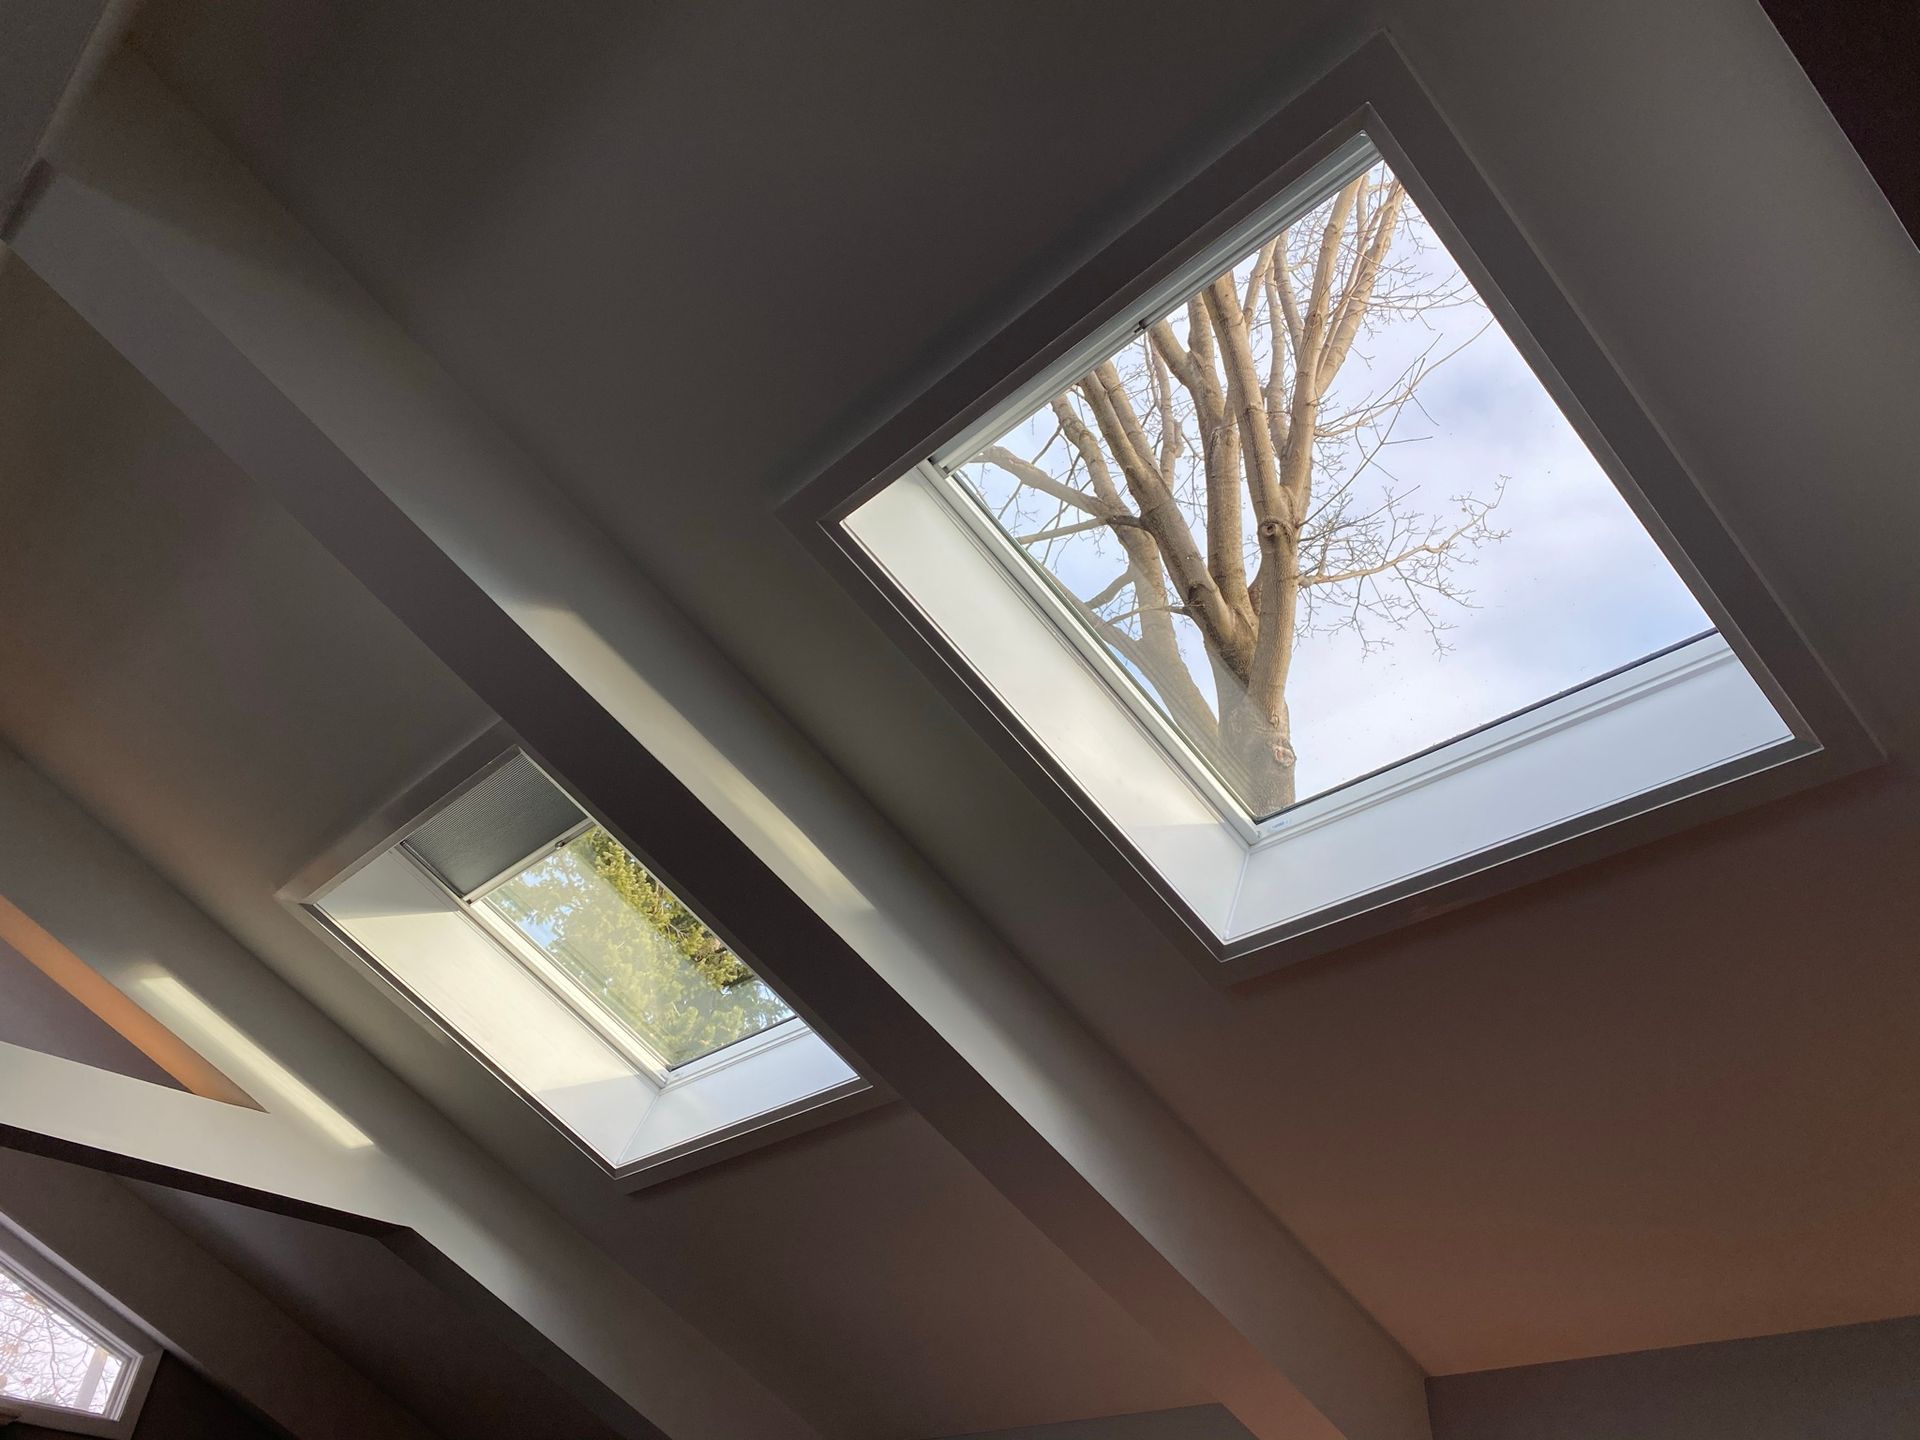 a tree is visible through a skylight in the ceiling